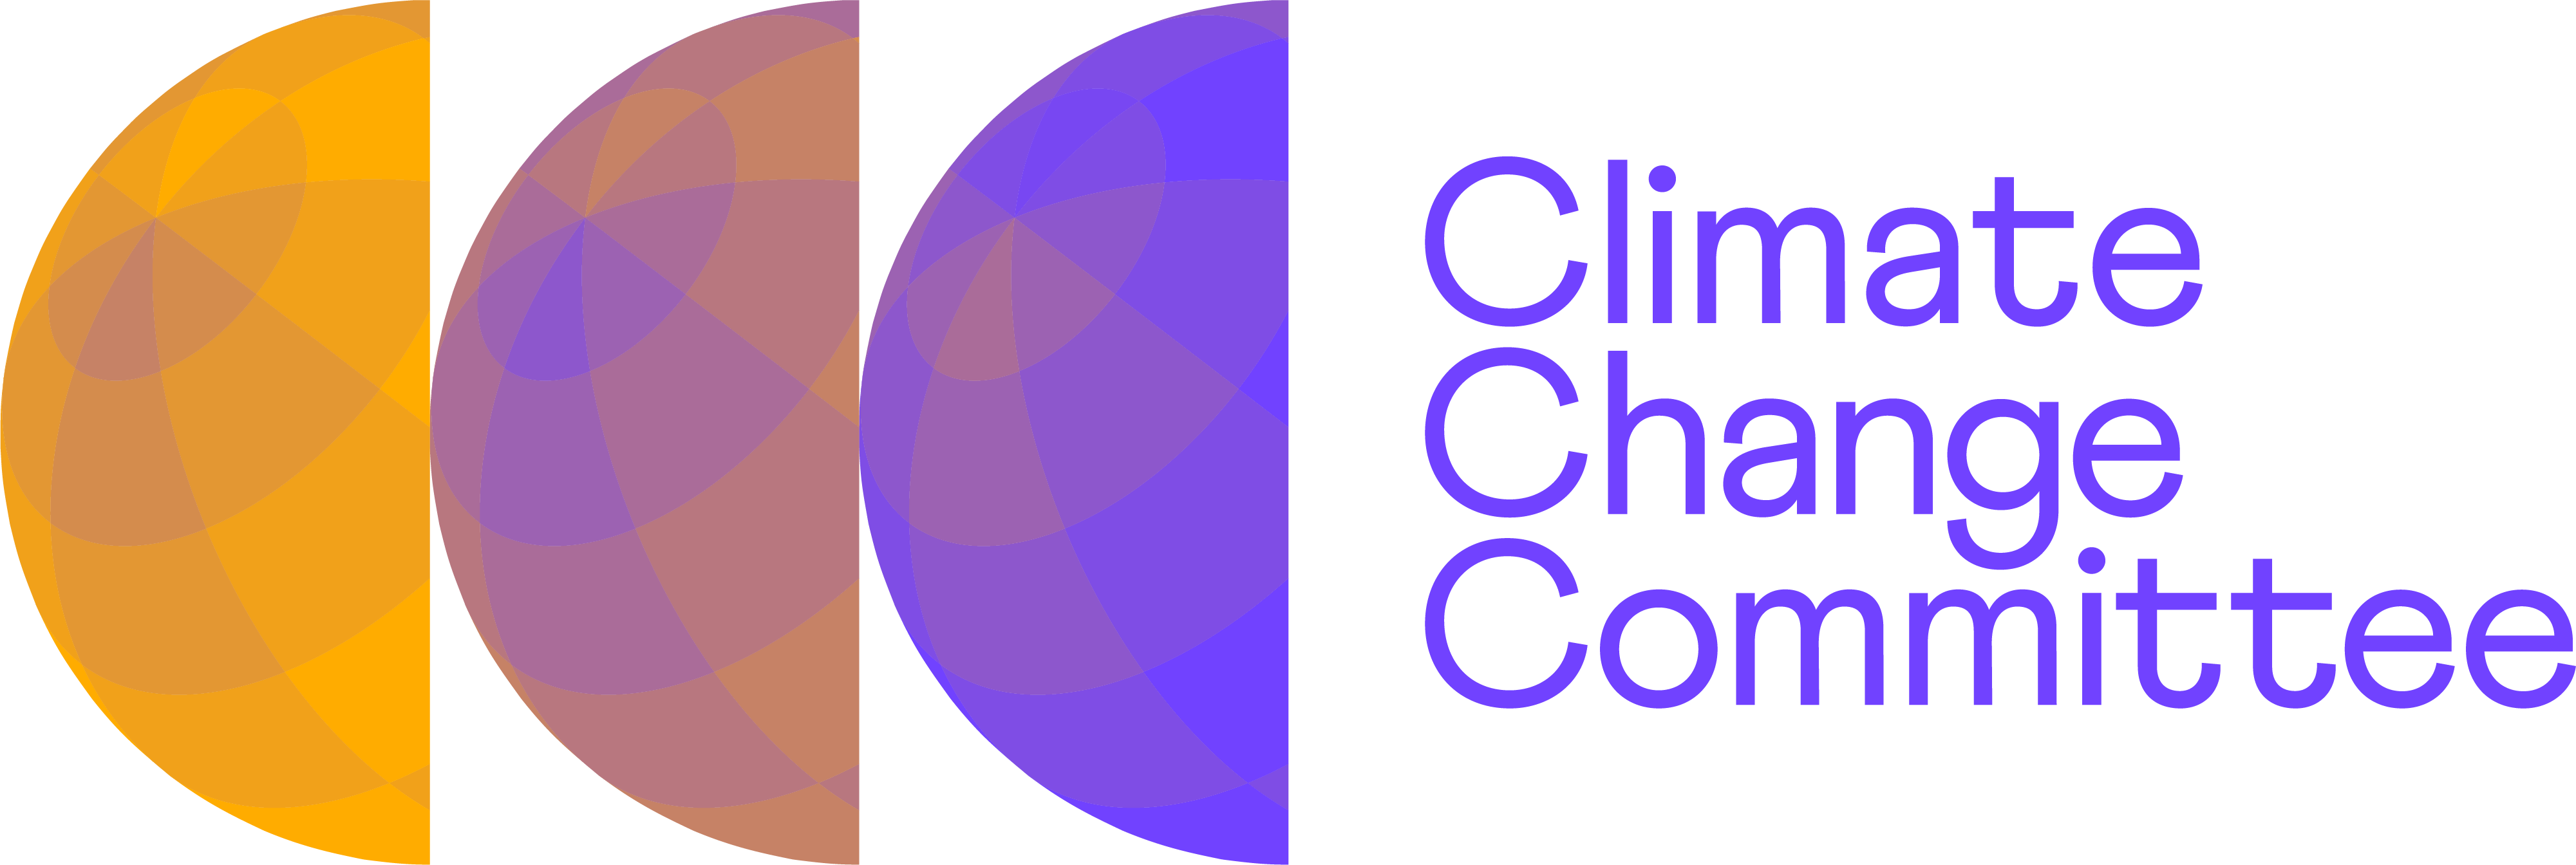 www.theccc.org.uk